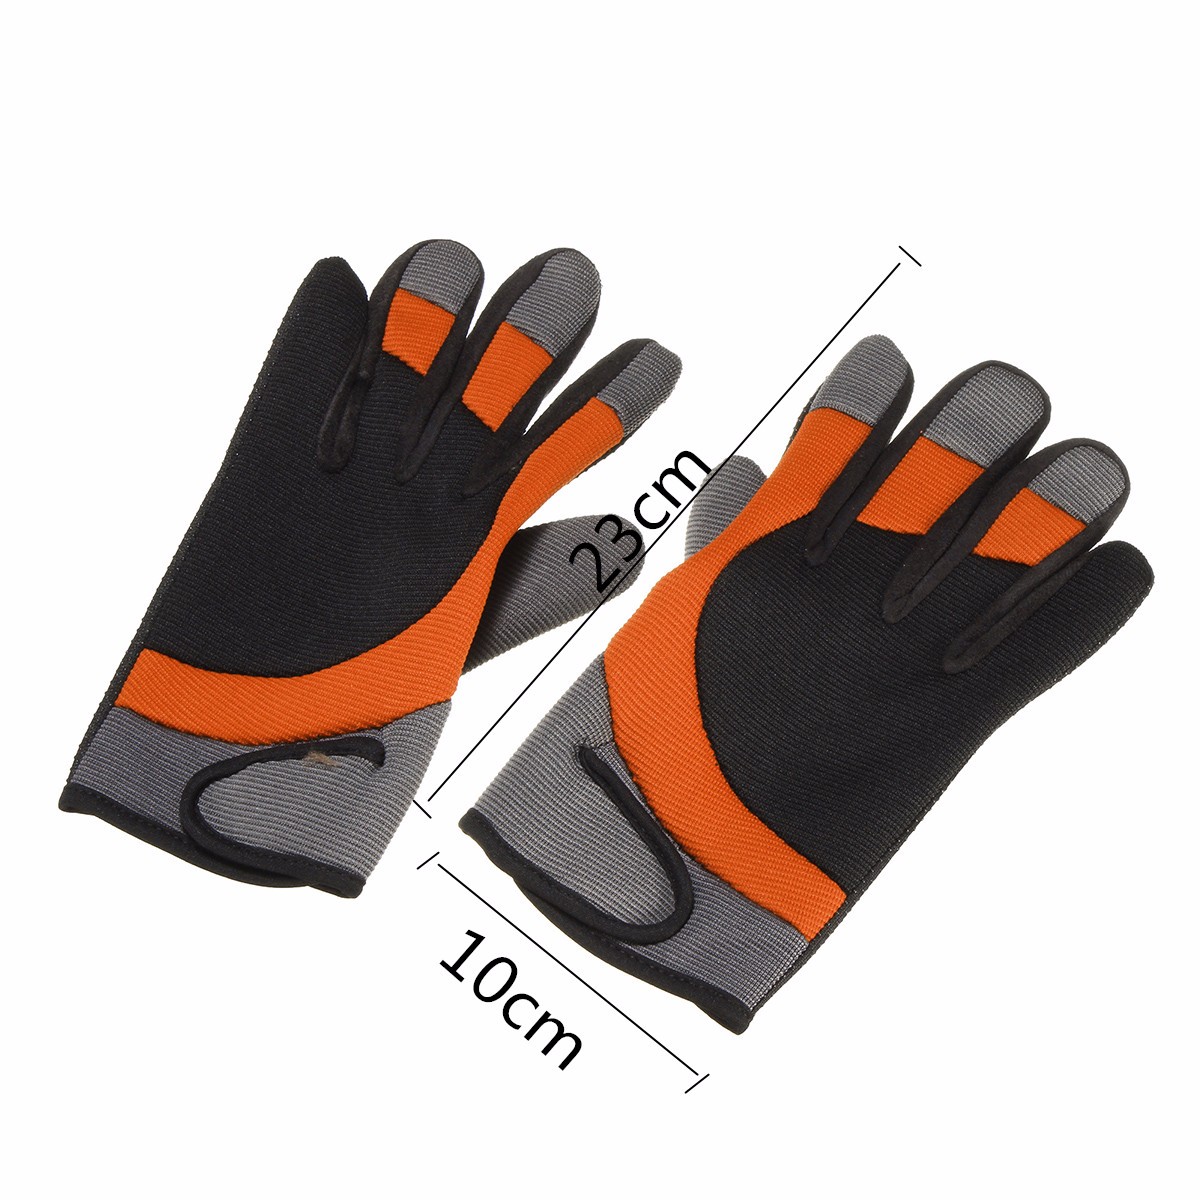 Men-Male-Nylon-Fiber-Thread-Driving-Gloves-Full-Fingers-Thick-Skidproof-Outdoor-Cycling-Mittens-1118719